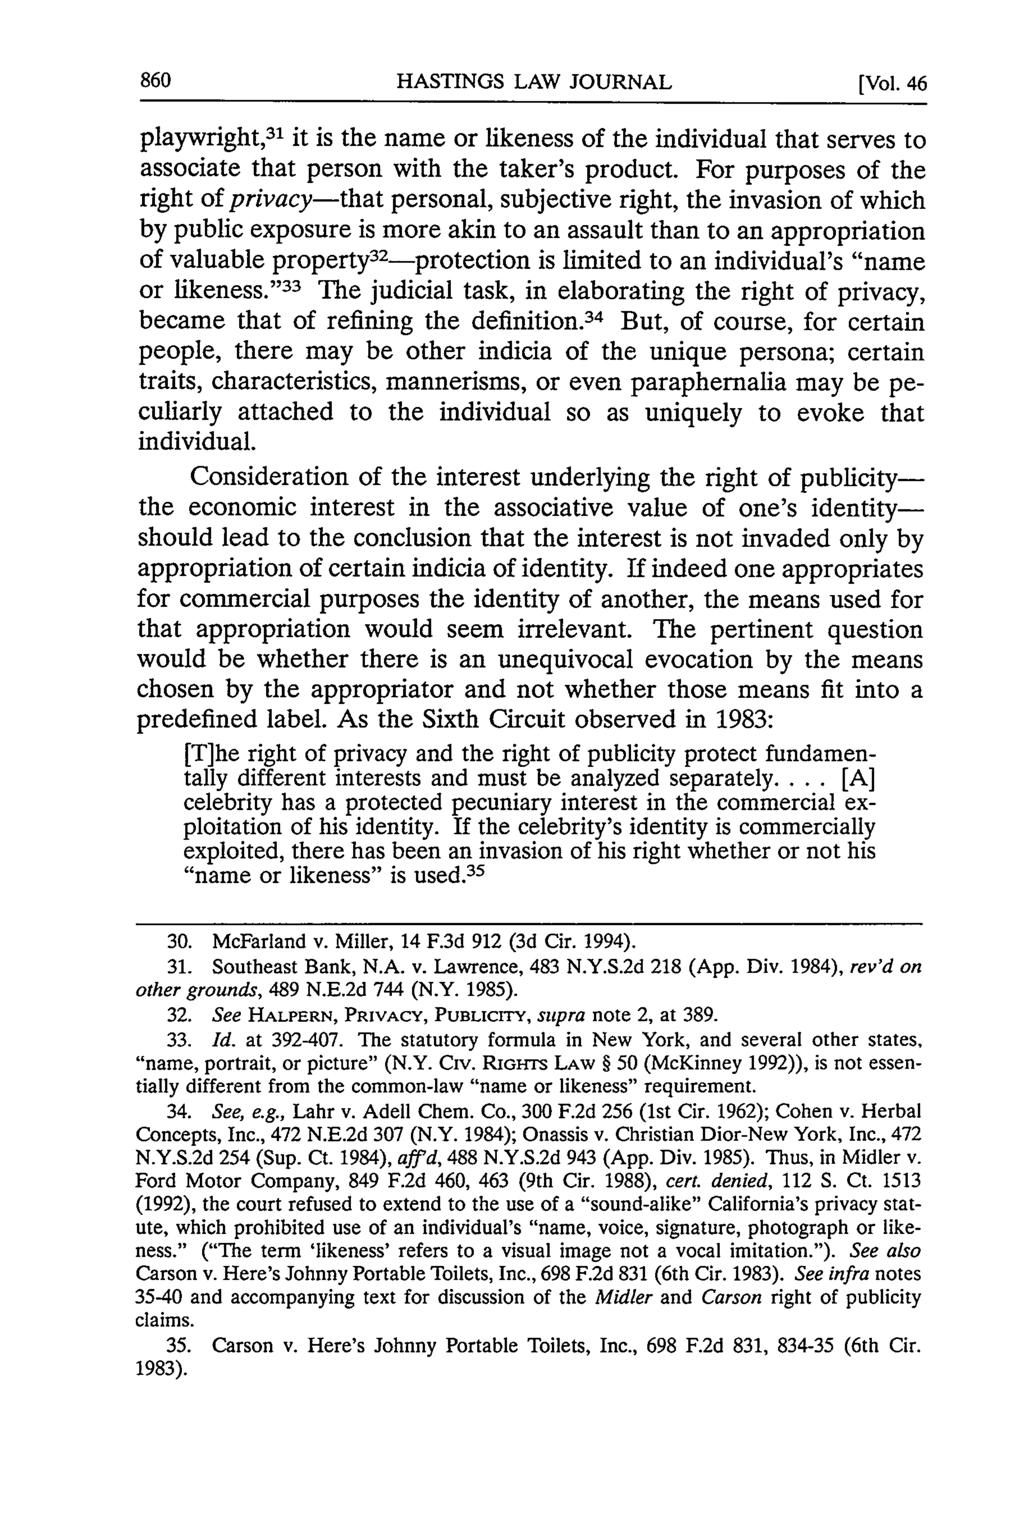 HASTINGS LAW JOURNAL [Vol. 46 playwright, 31 it is the name or likeness of the individual that serves to associate that person with the taker's product.